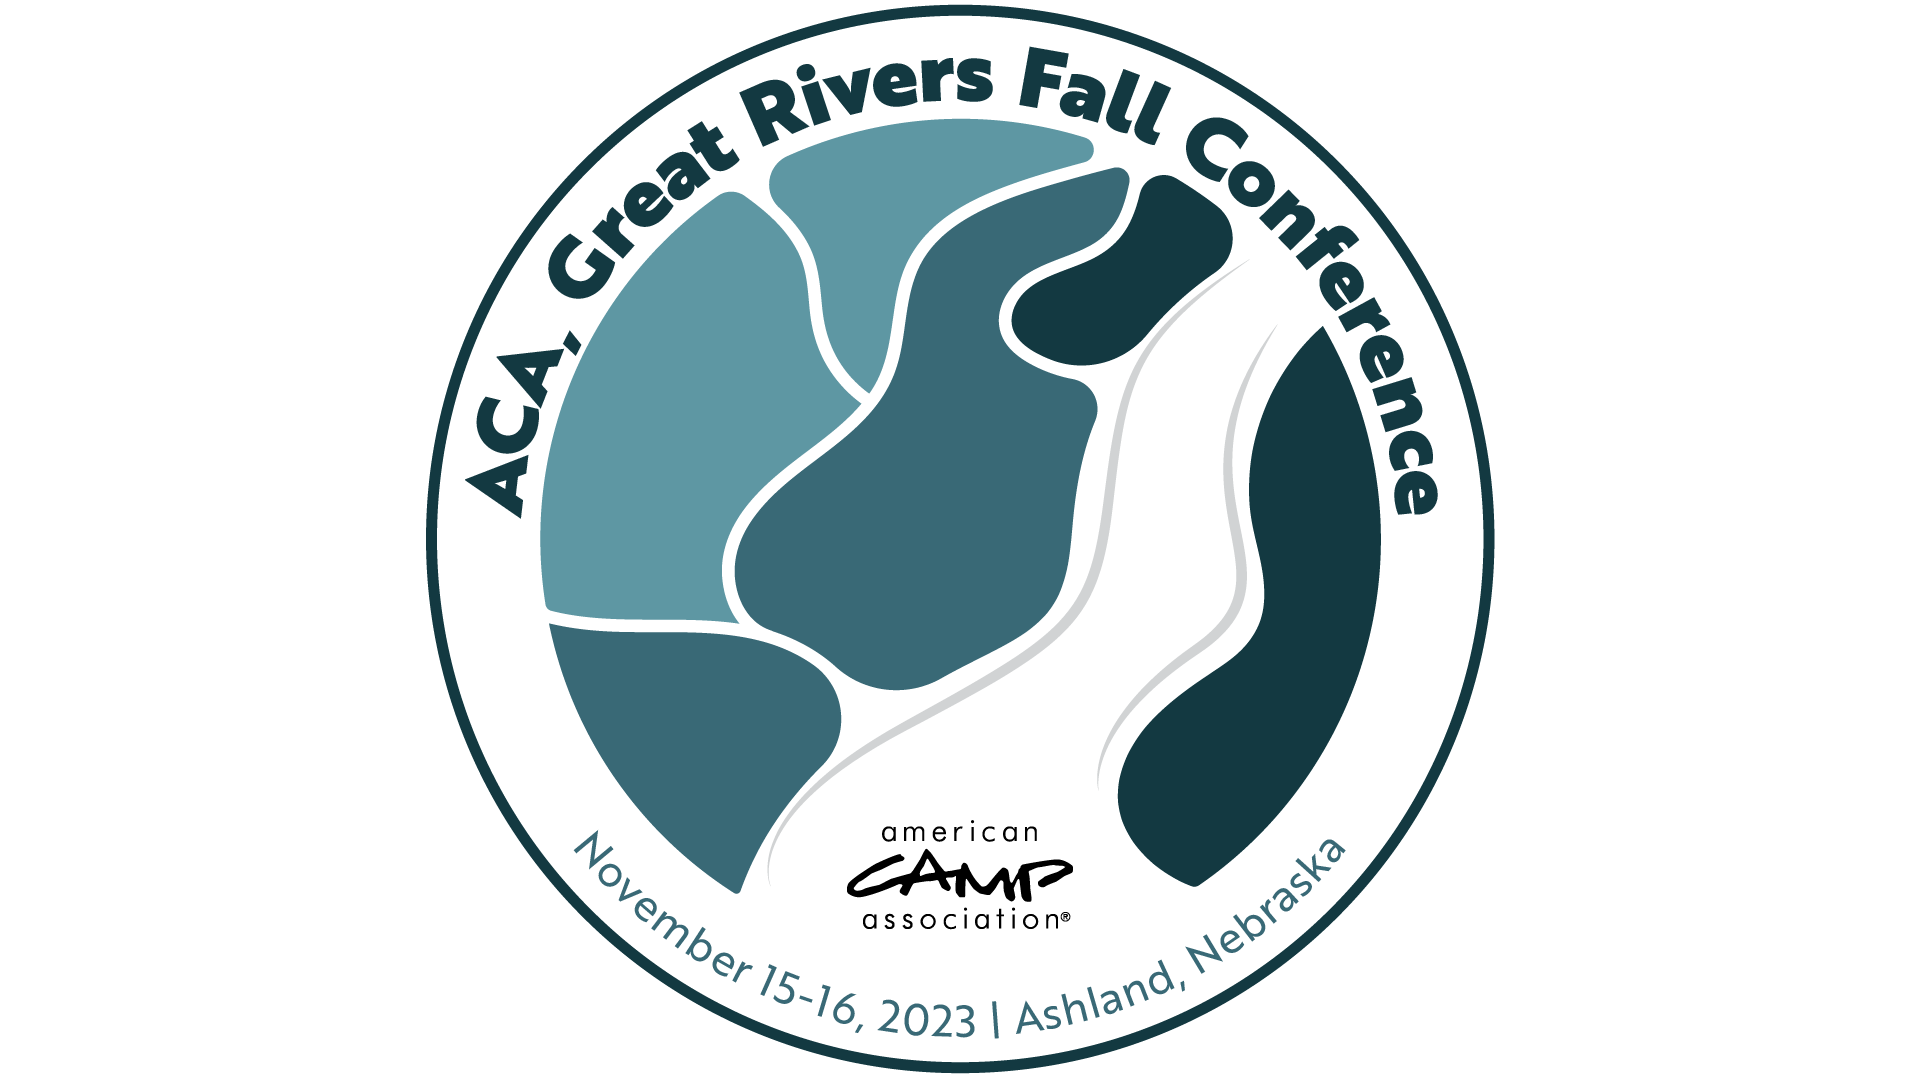 ACA, Great Rivers Fall Conference American Camp Association